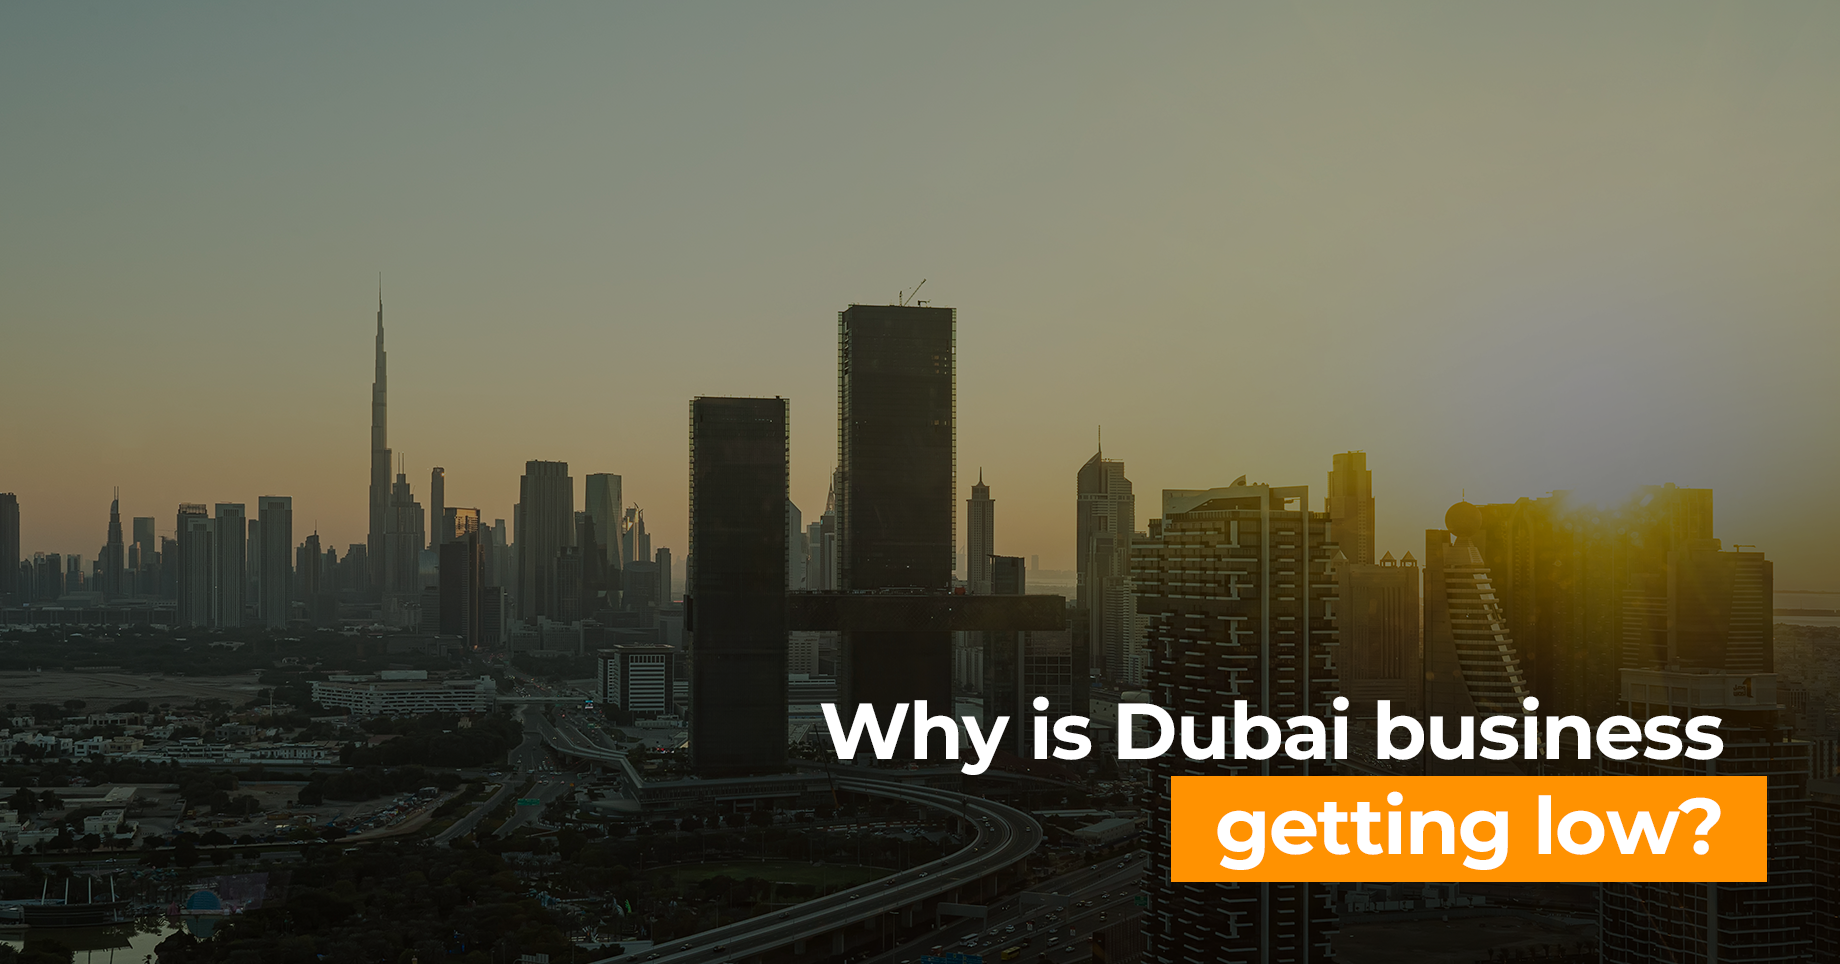 Why is Dubai business getting low?